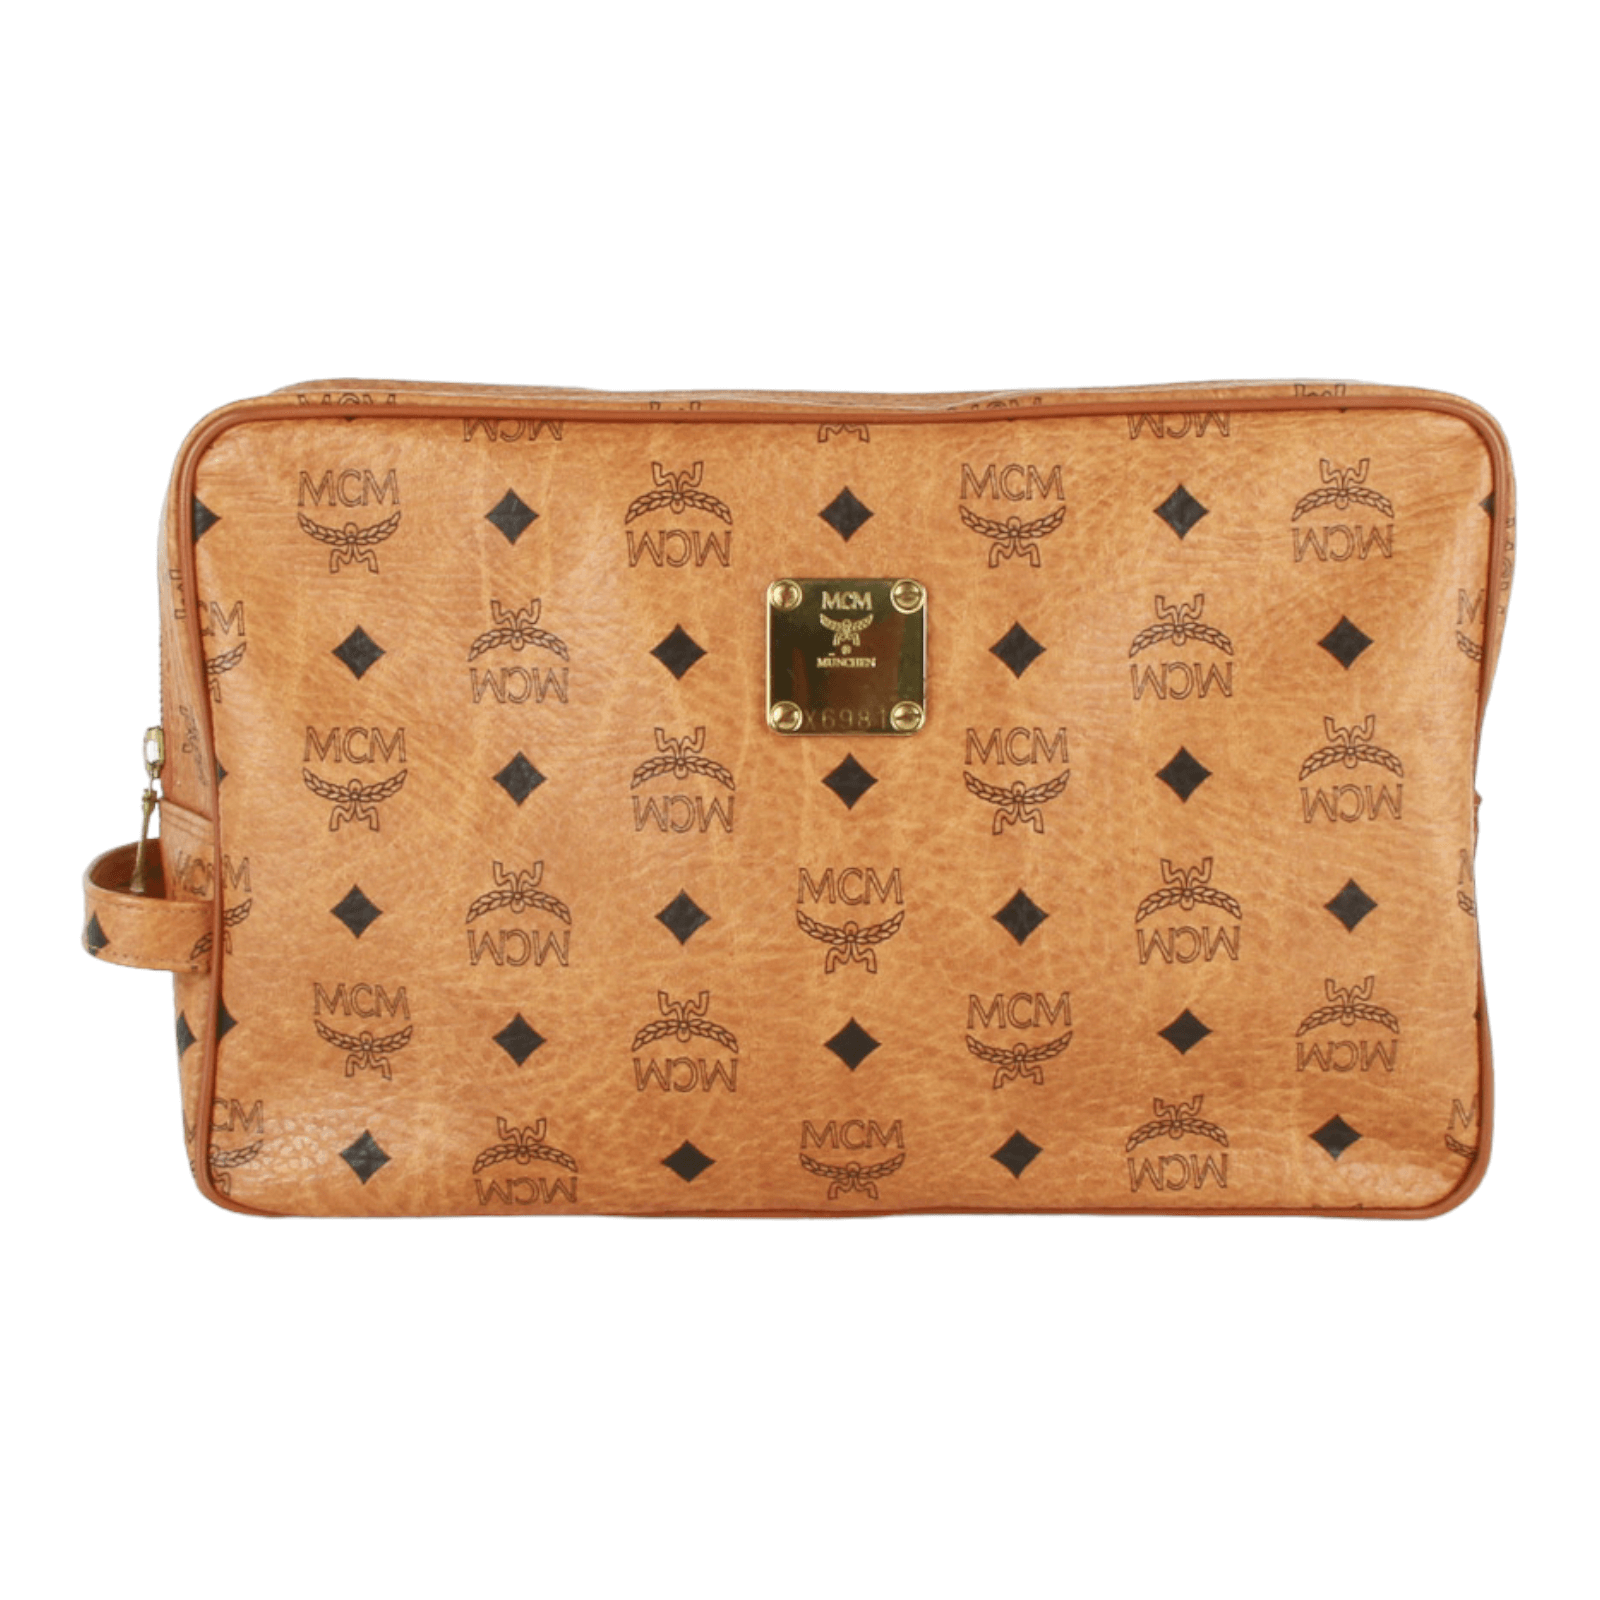 Shop second hand designer toiletry bags